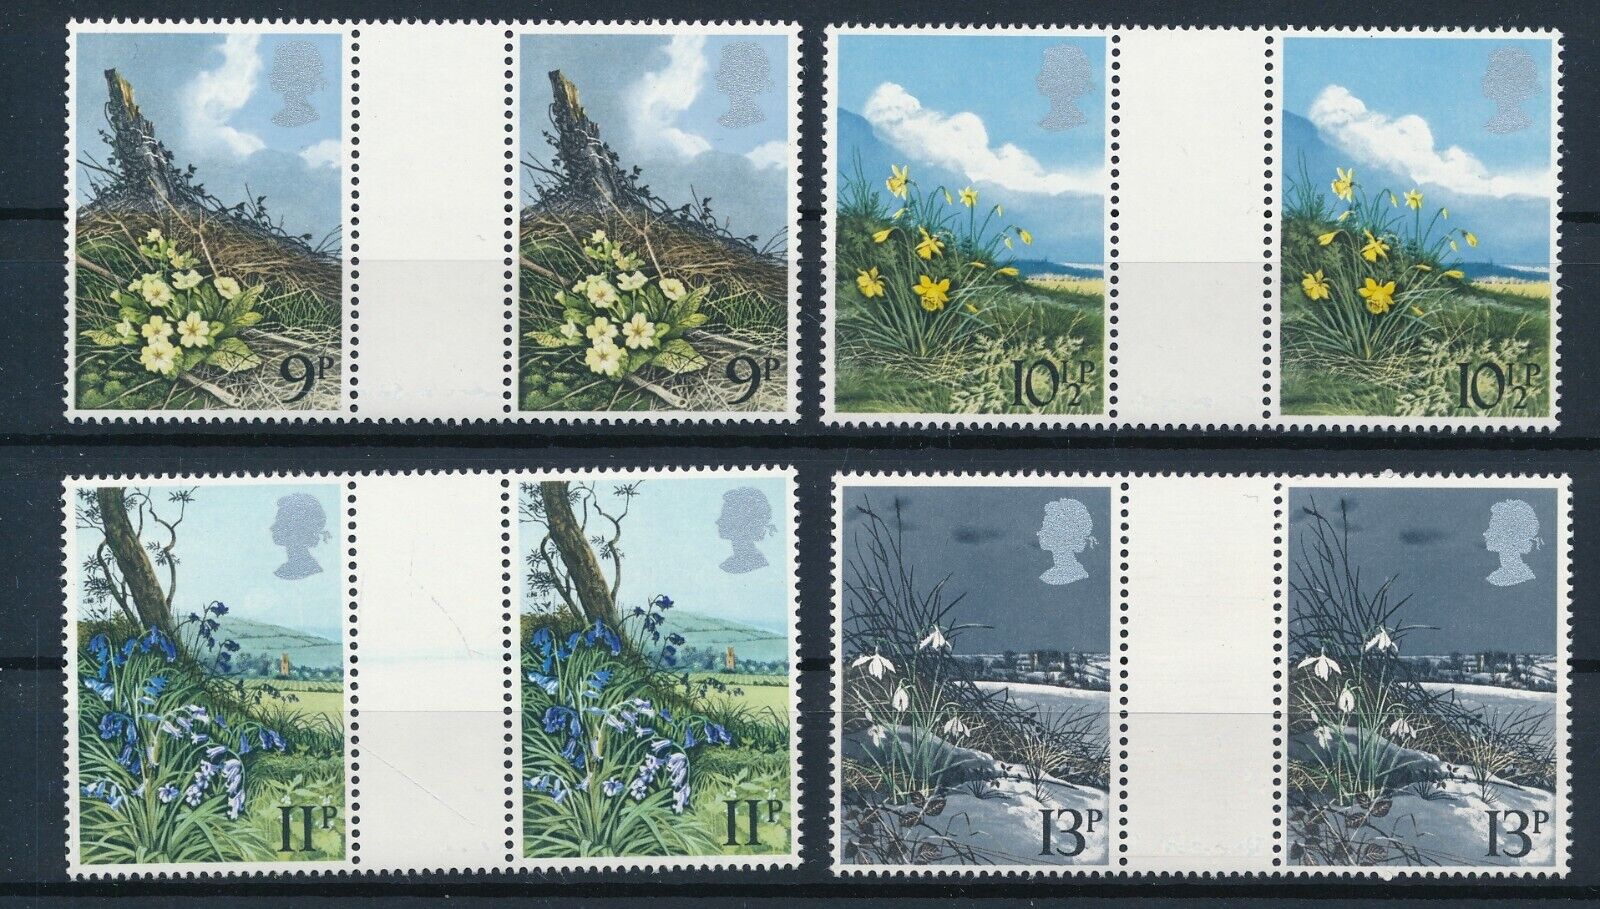 [i2895] Great Britain 1979 Fauna Good Set Of Stamps Gutterpair Very Fine Mnh